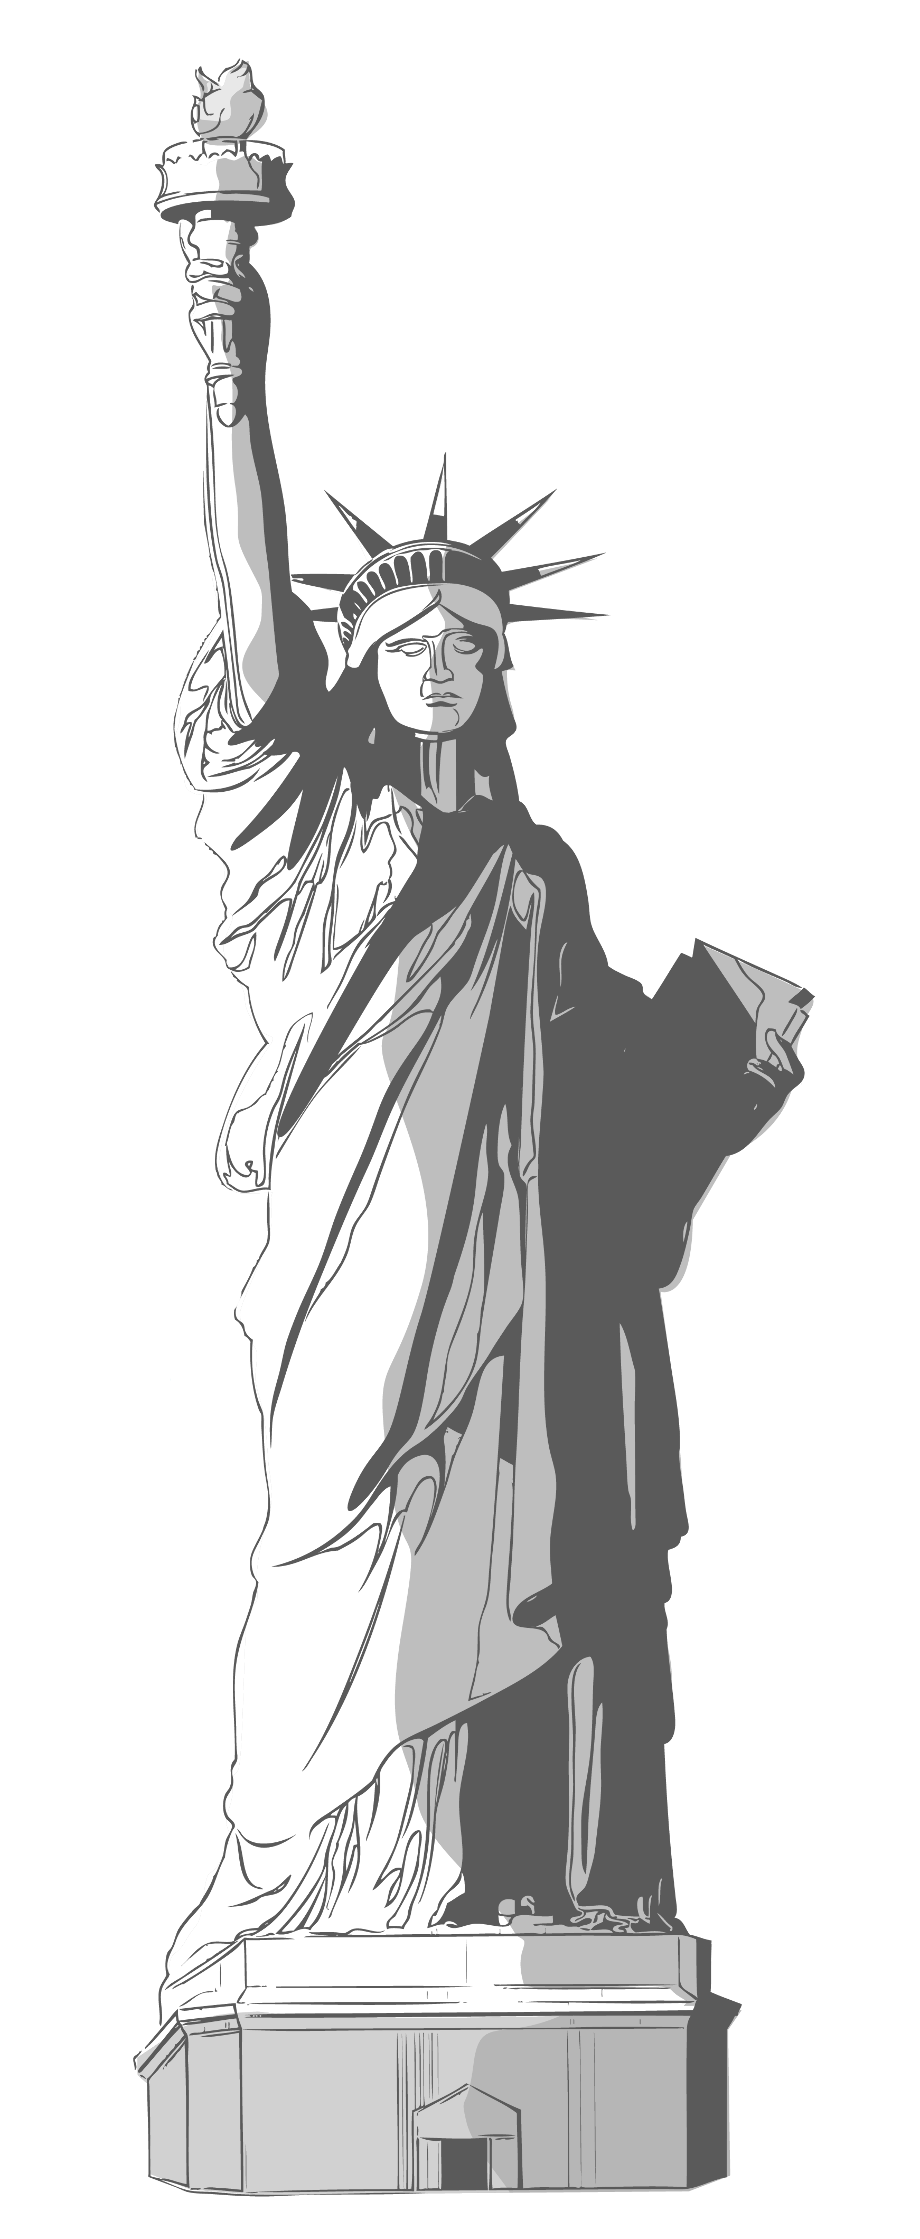 Download High Quality statue of liberty clipart high resolution ...